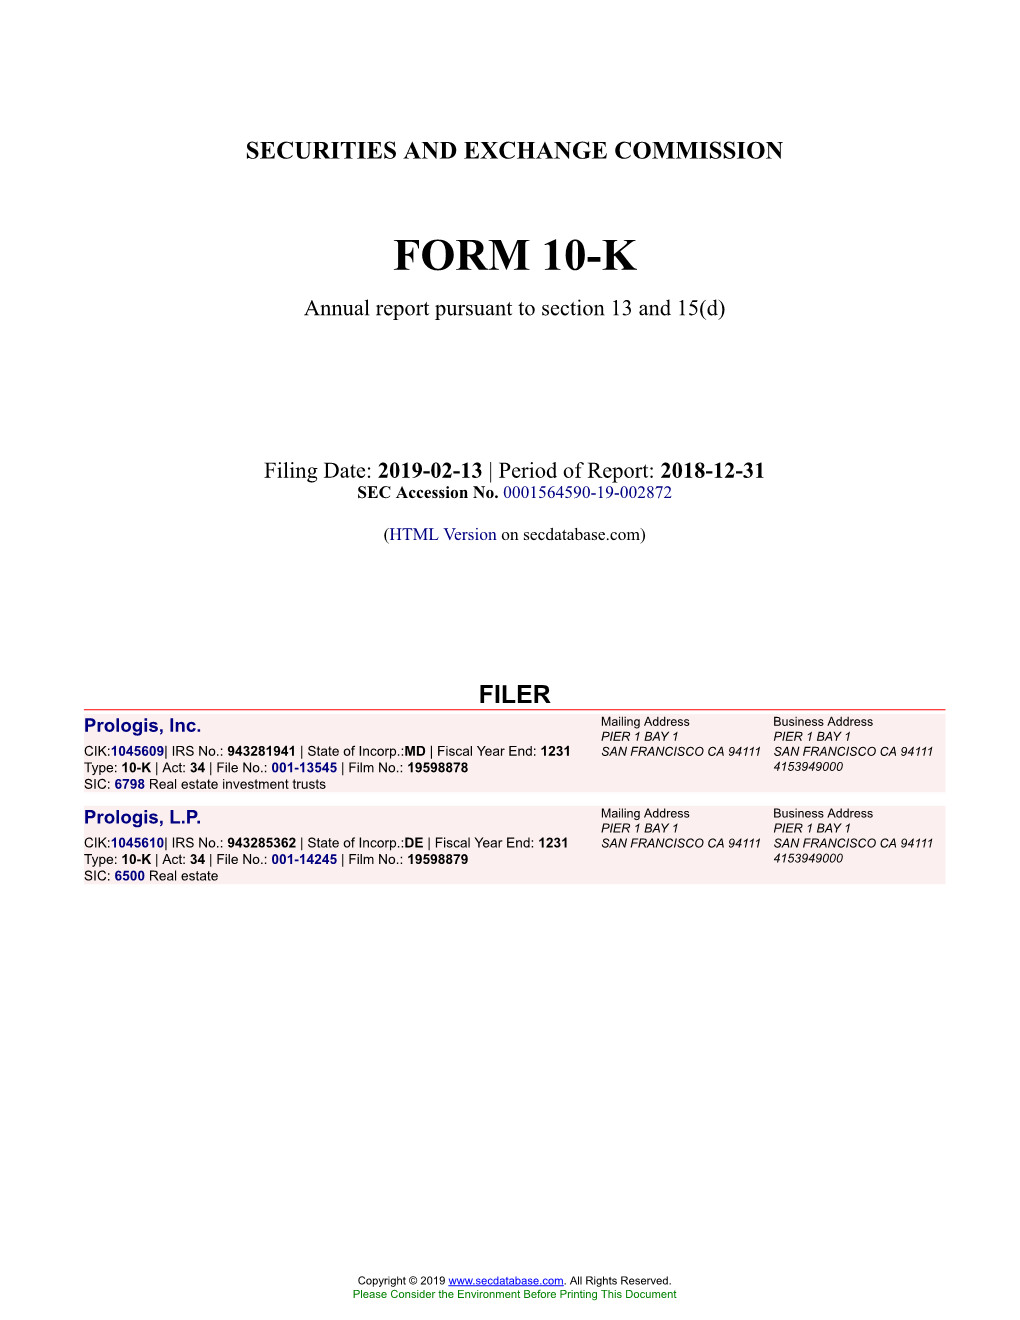 Prologis, Inc. Form 10-K Annual Report Filed 2019-02-13